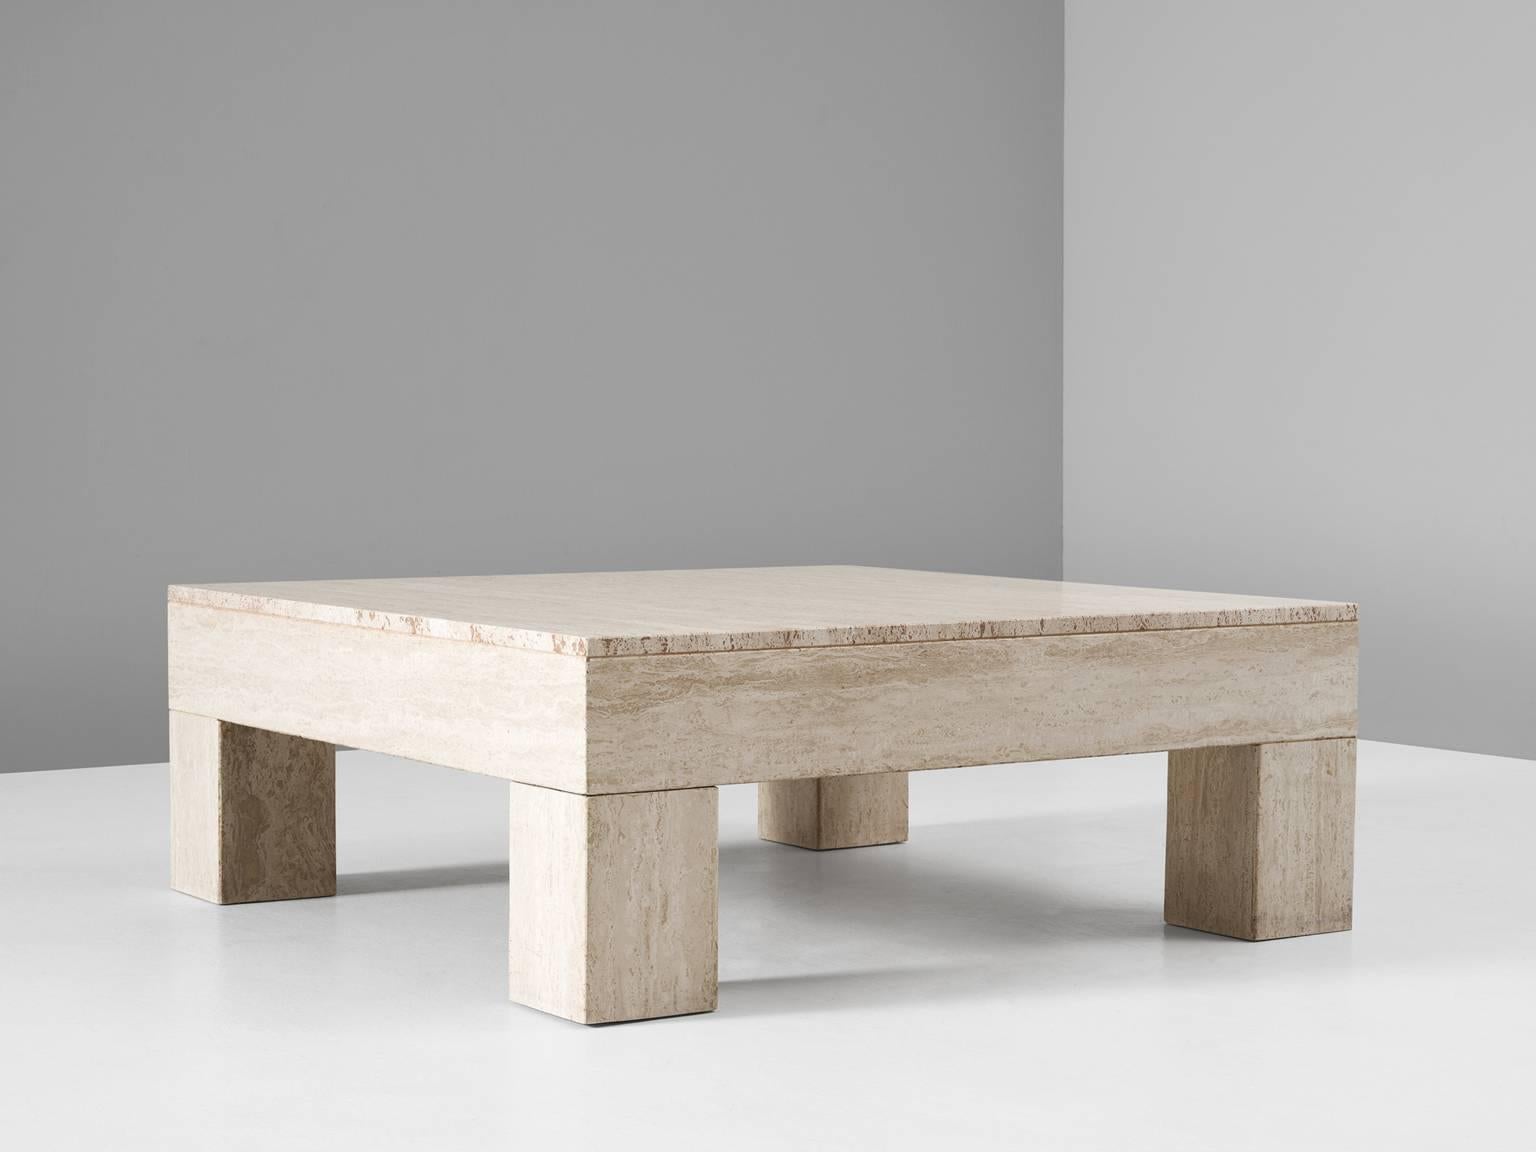 Square coffee table in travertine, Europe, 1970s. 

The basic design of this coffee table shows nice proportions. The thickness of the top part and the legs is equal, which emphasizes the clearness of the design.

The sturdy square legs are